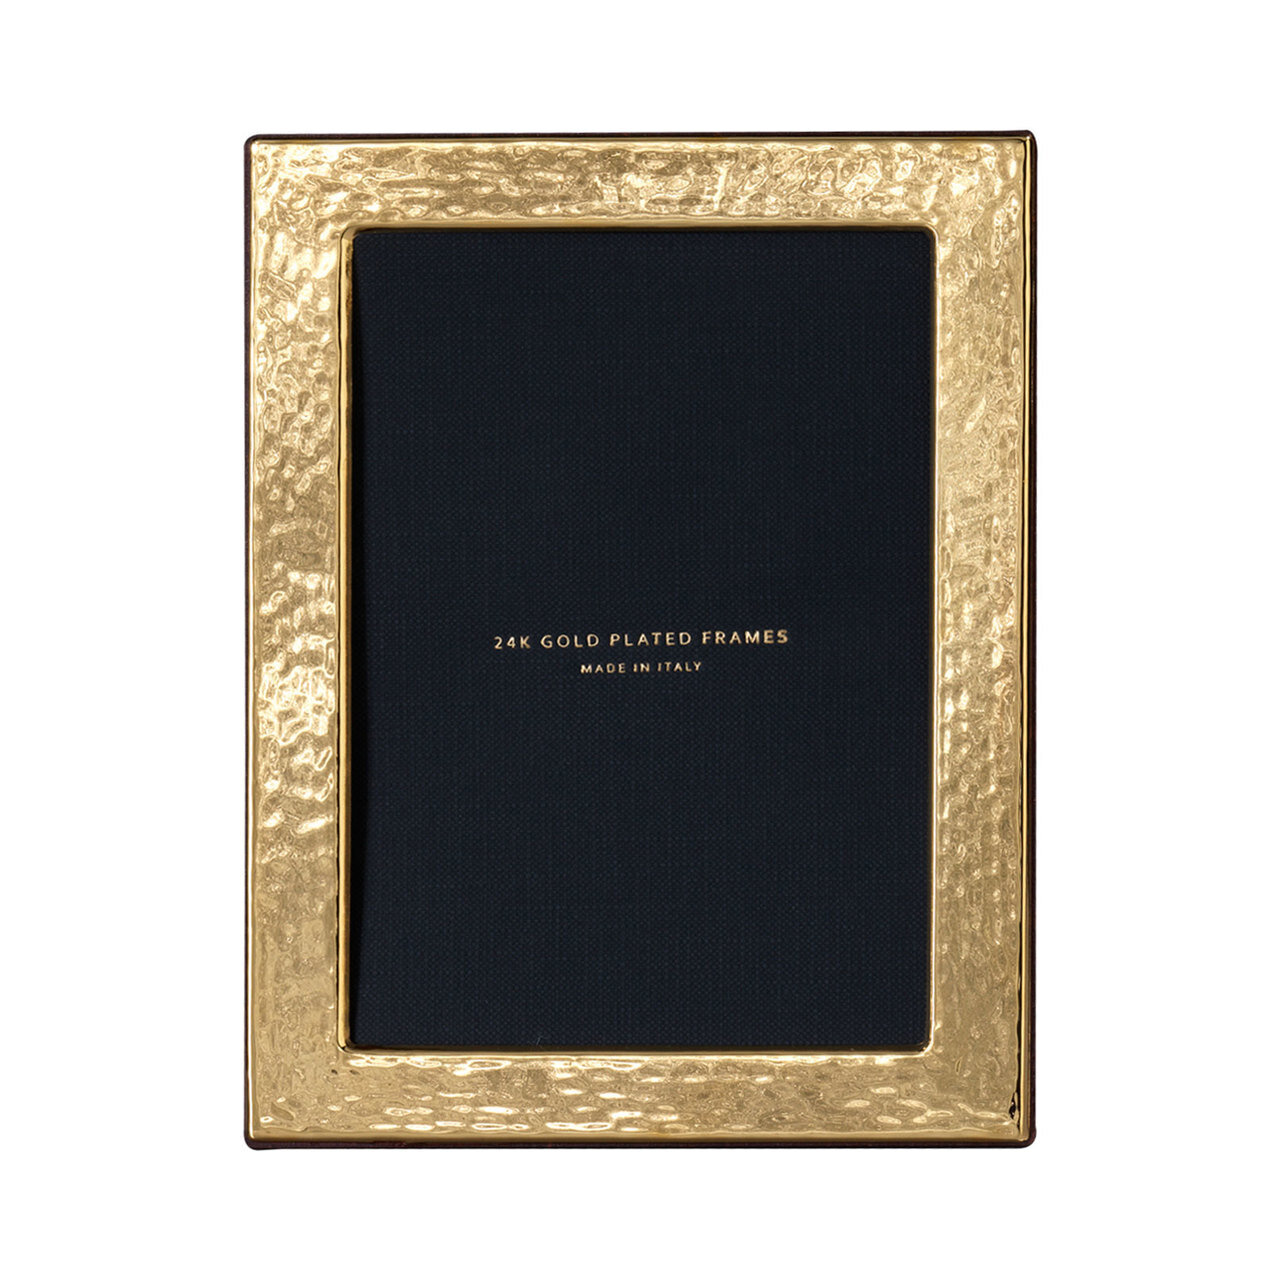 Cunill Hammered 8 x 10 Inch Picture Frame - 24k Gold Plated 0.5 Microns